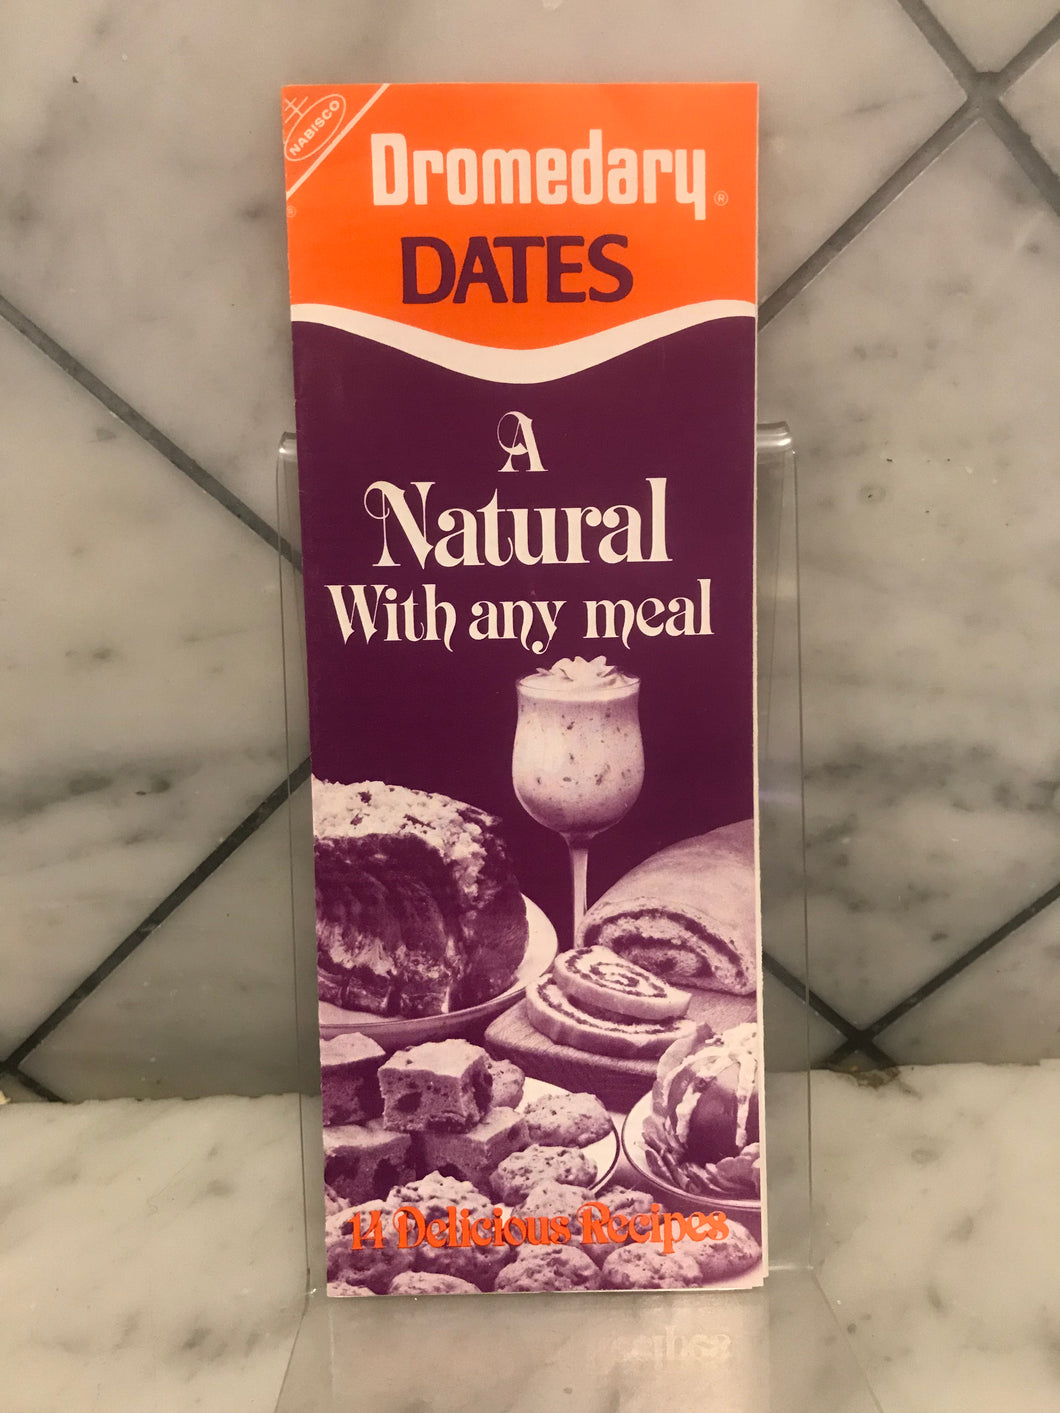 Dromedary Dates, A Natural With Any Meal